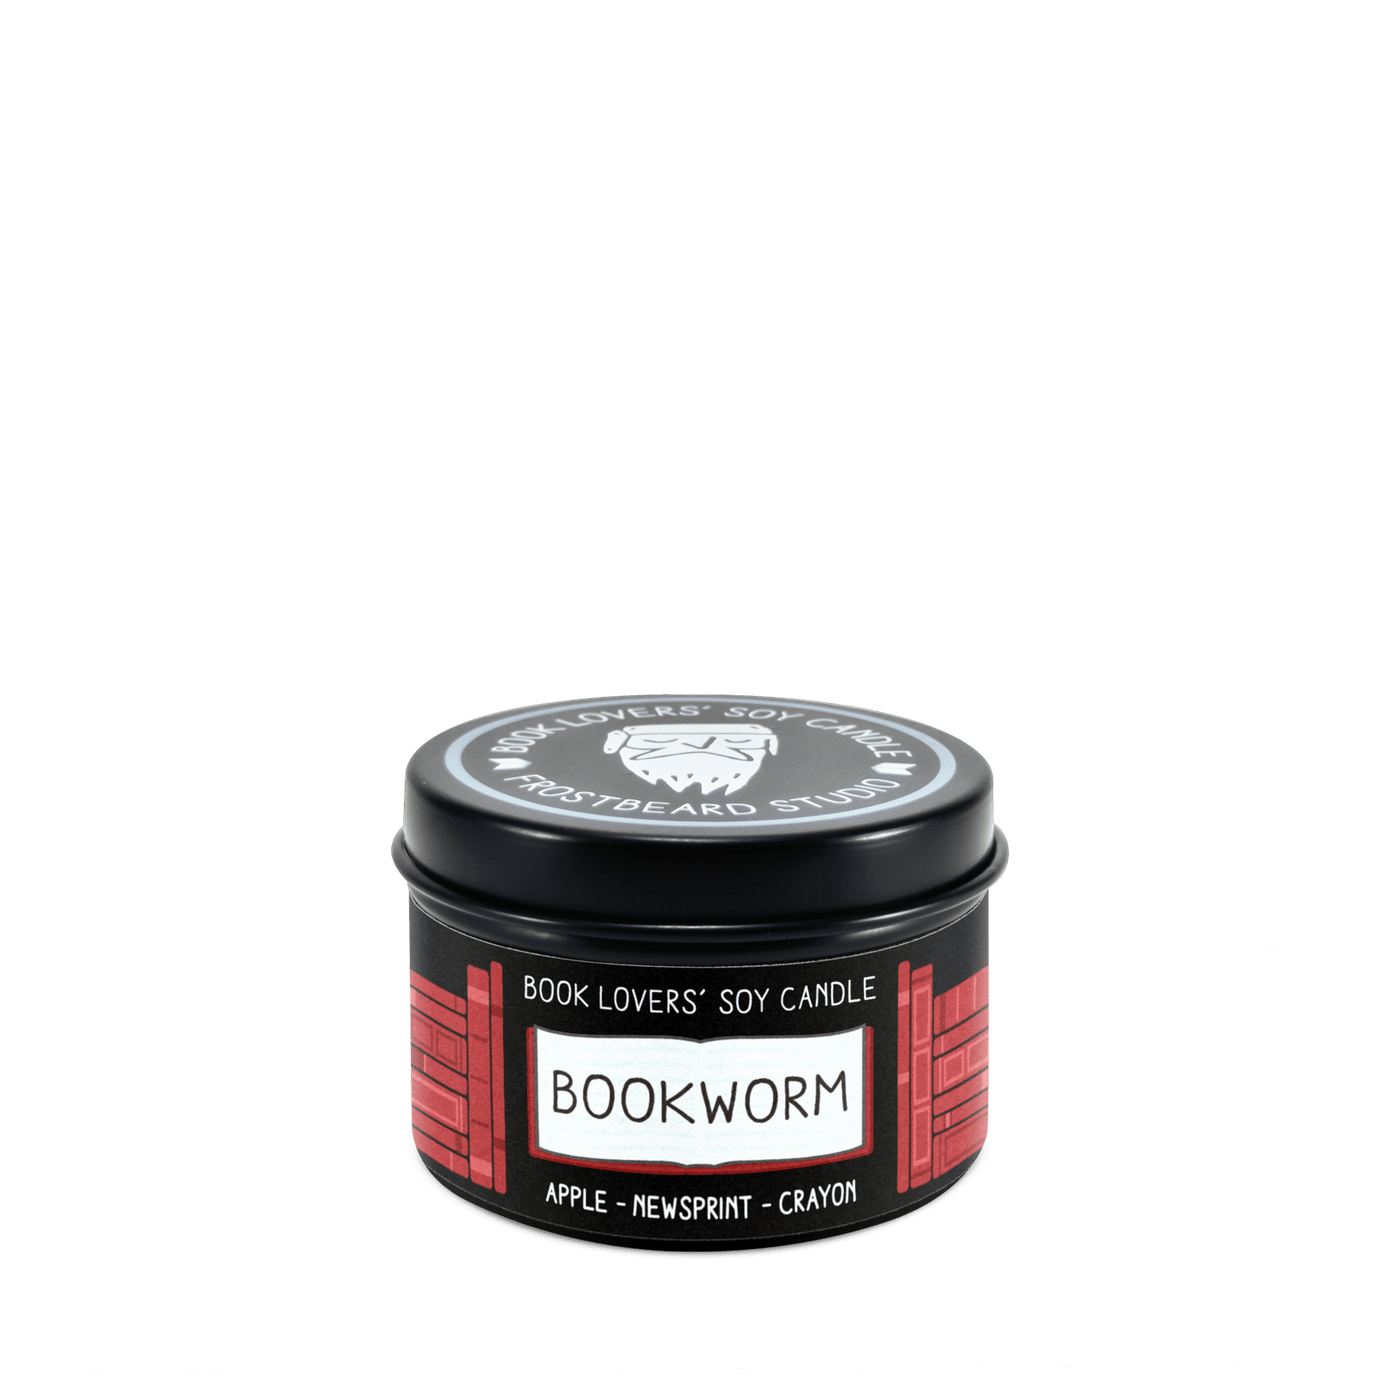 Bookworm  -  2 oz Tin  -  Book Lovers' Soy Candle  -  Frostbeard Studio